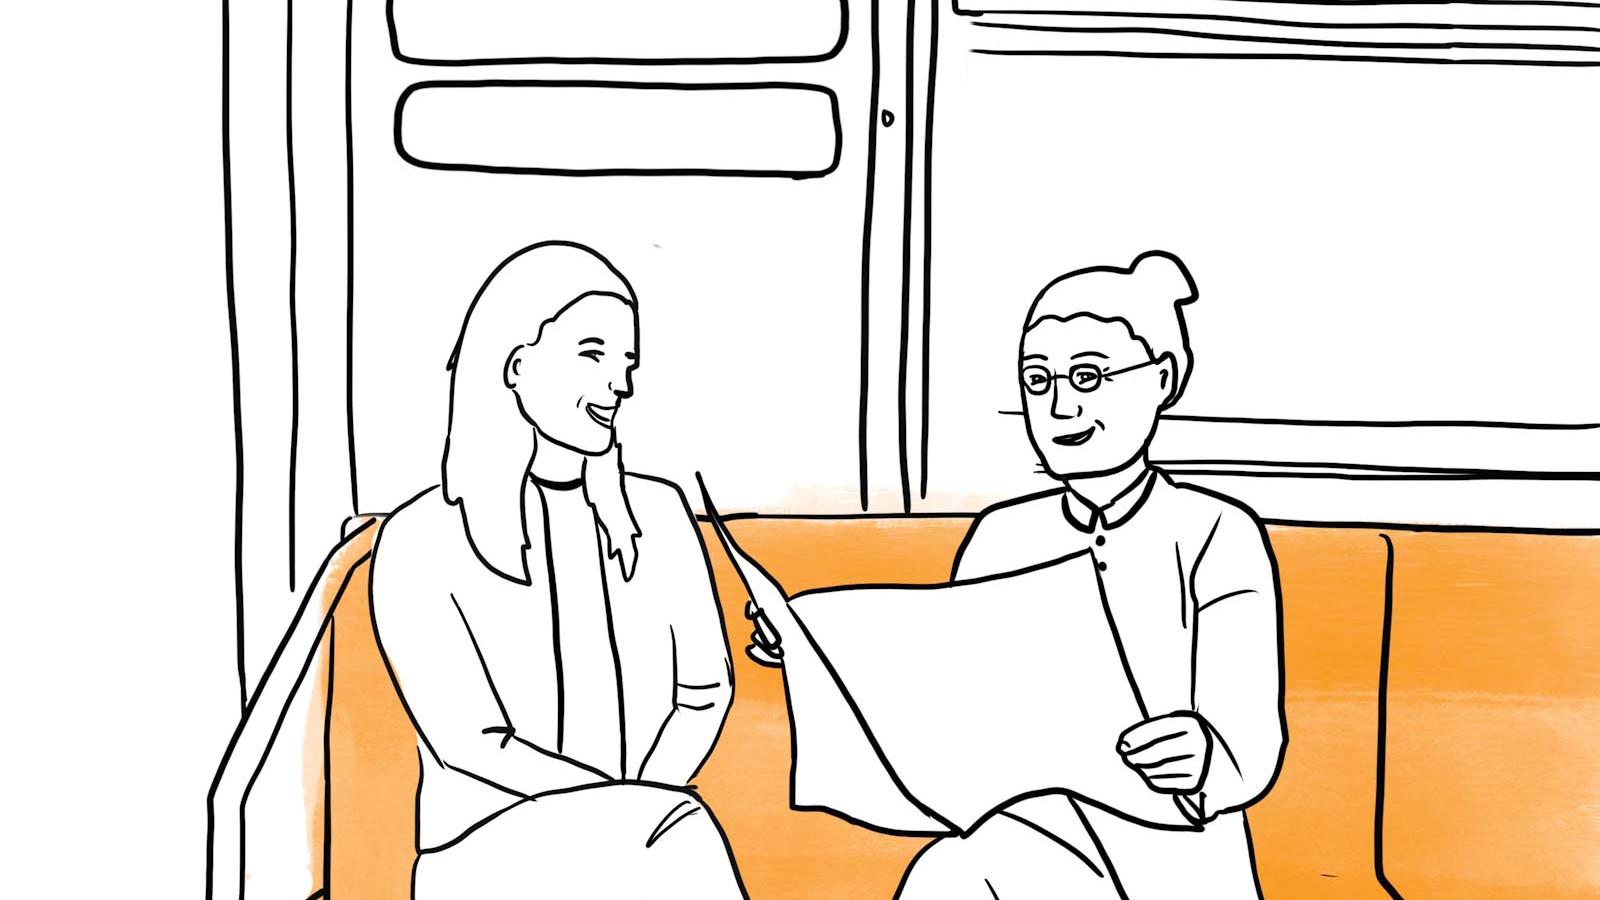 sketch of 2 women seated on a subway train